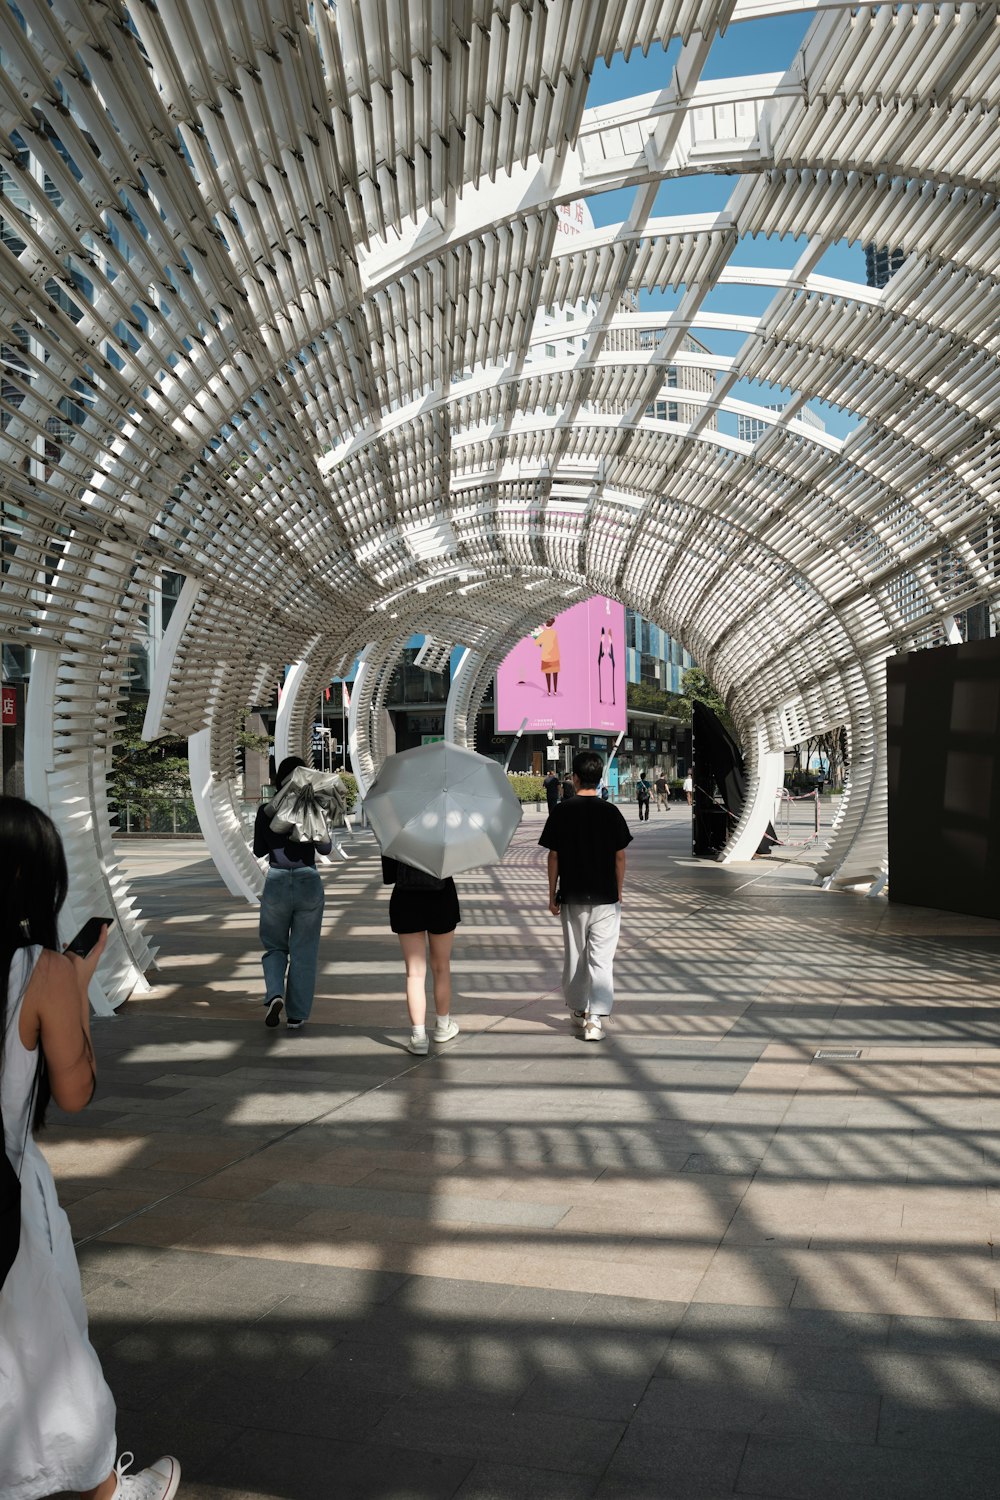 a group of people walking down a walkway holding umbrellas